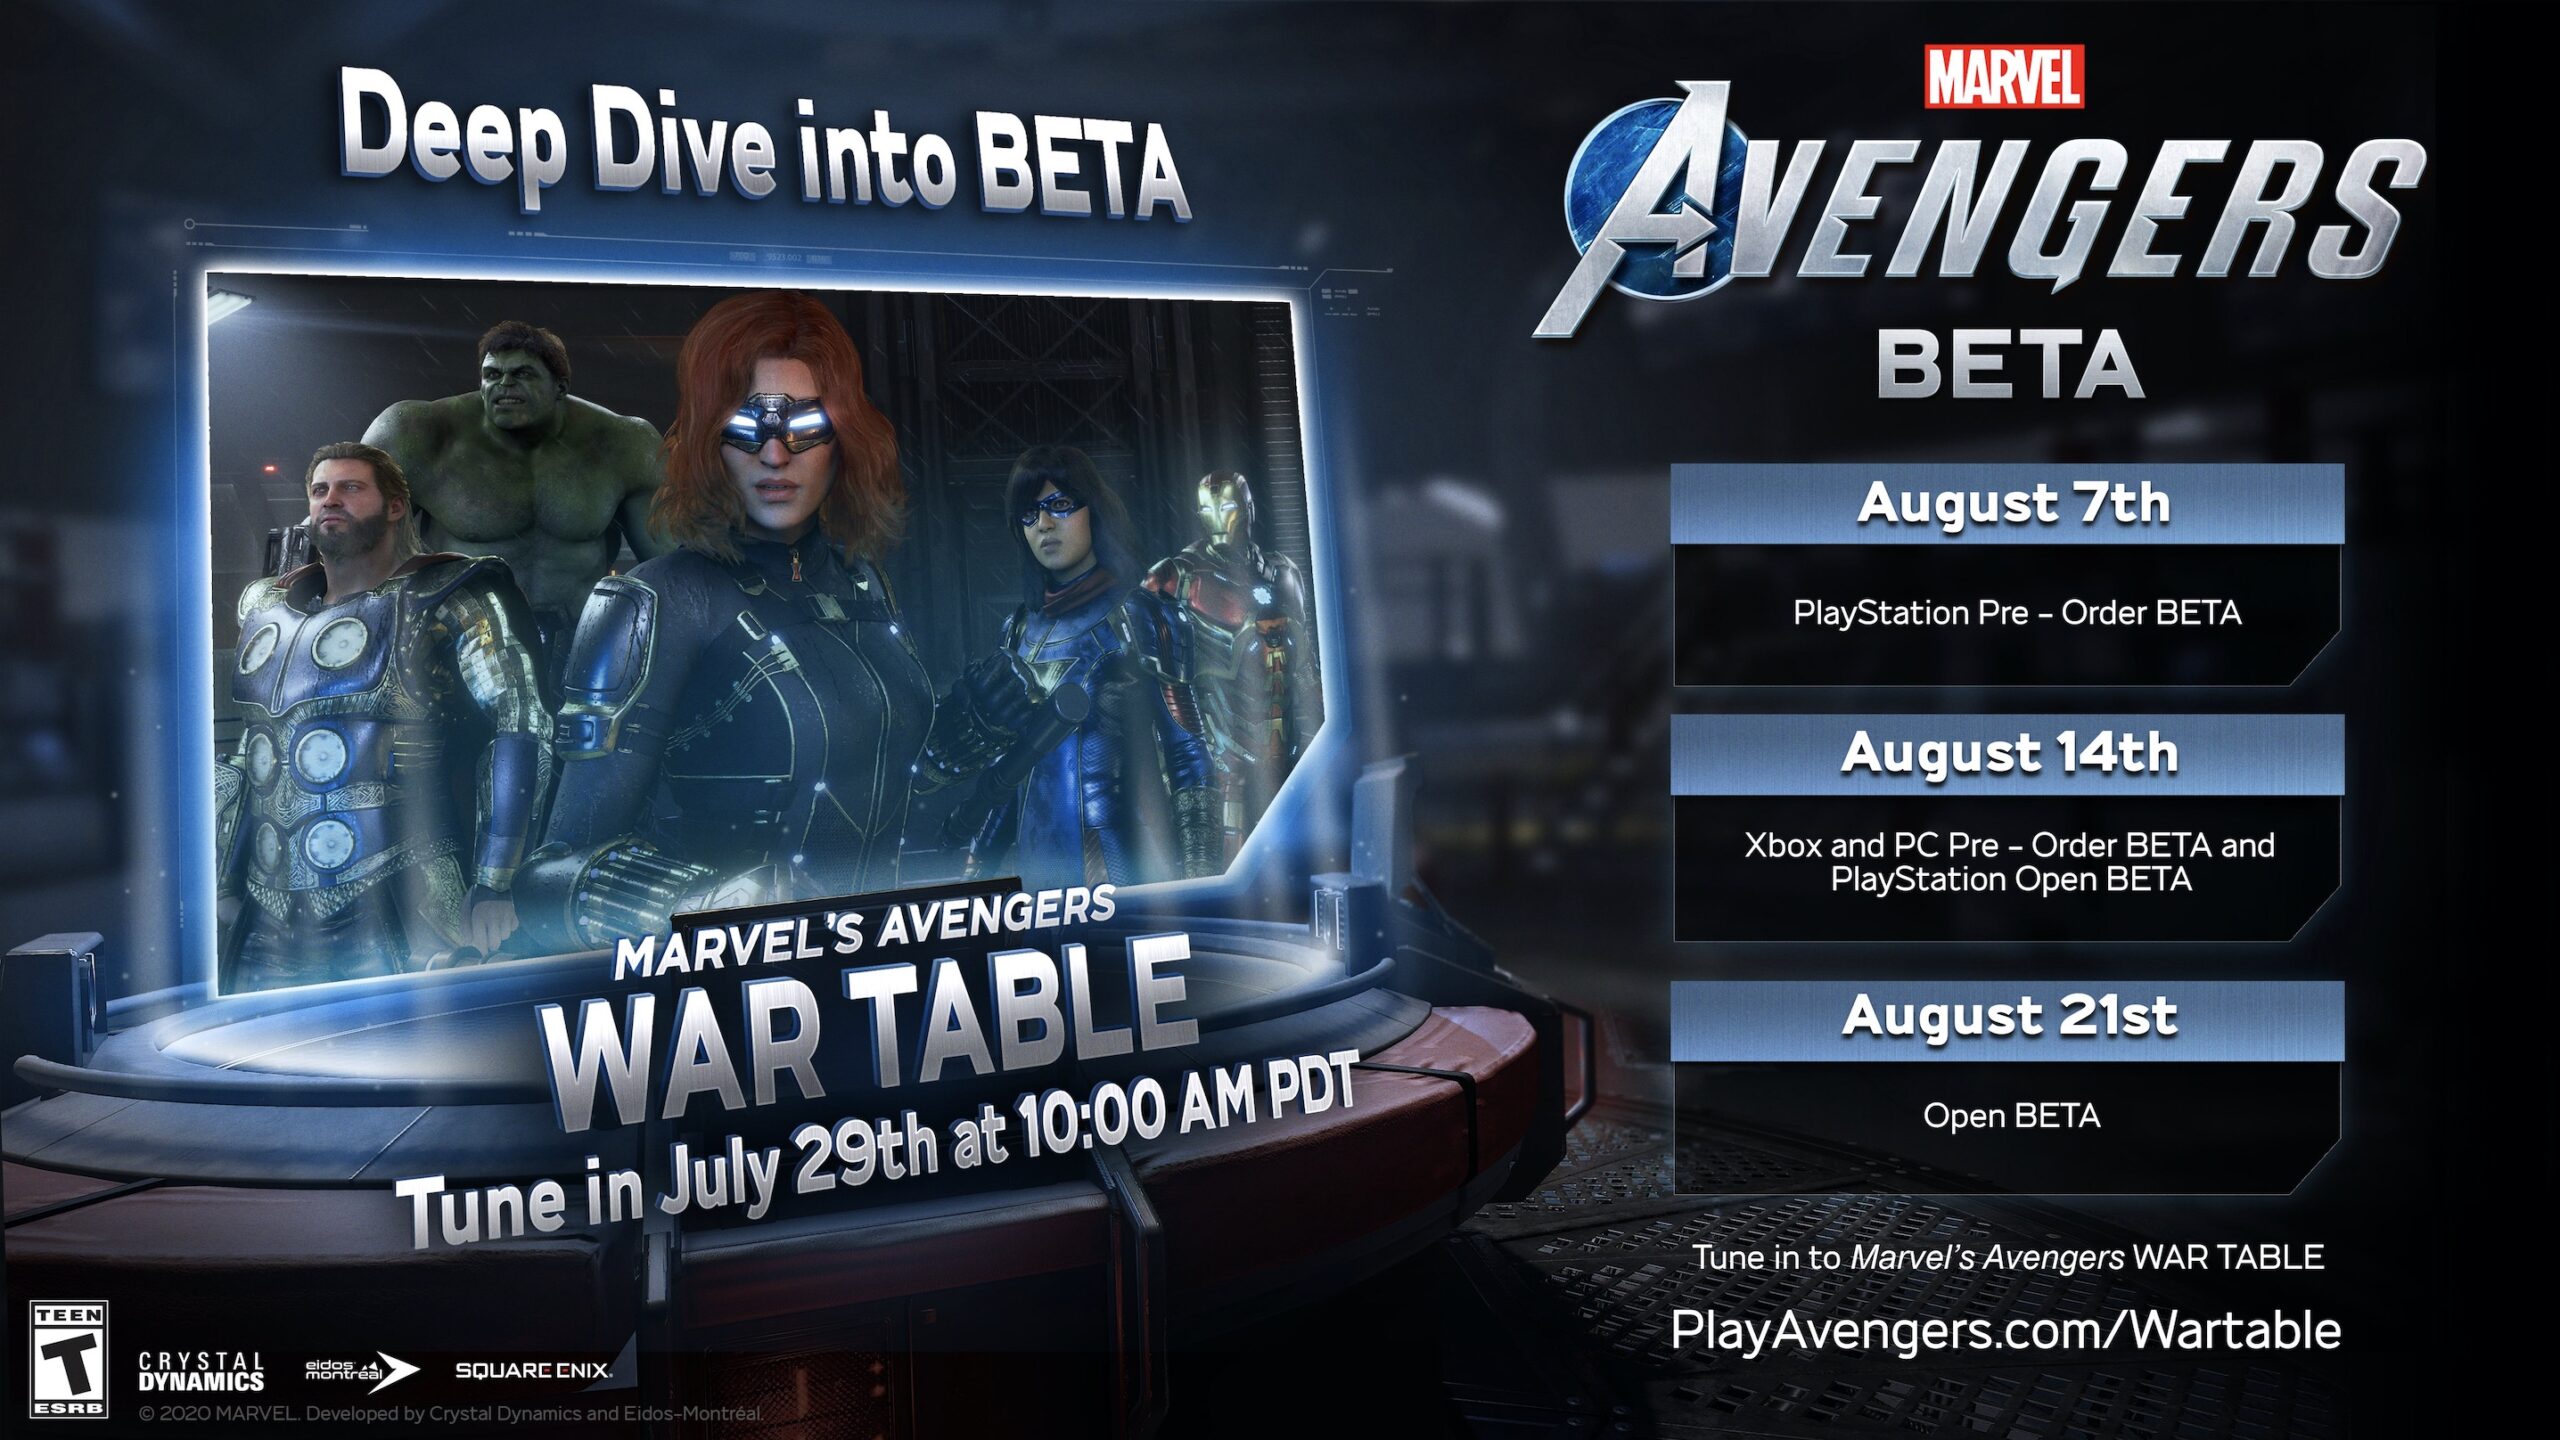 Marvel’s Avengers Next War Table Premieres July 29; Betas Begin August 7, 14, and 21